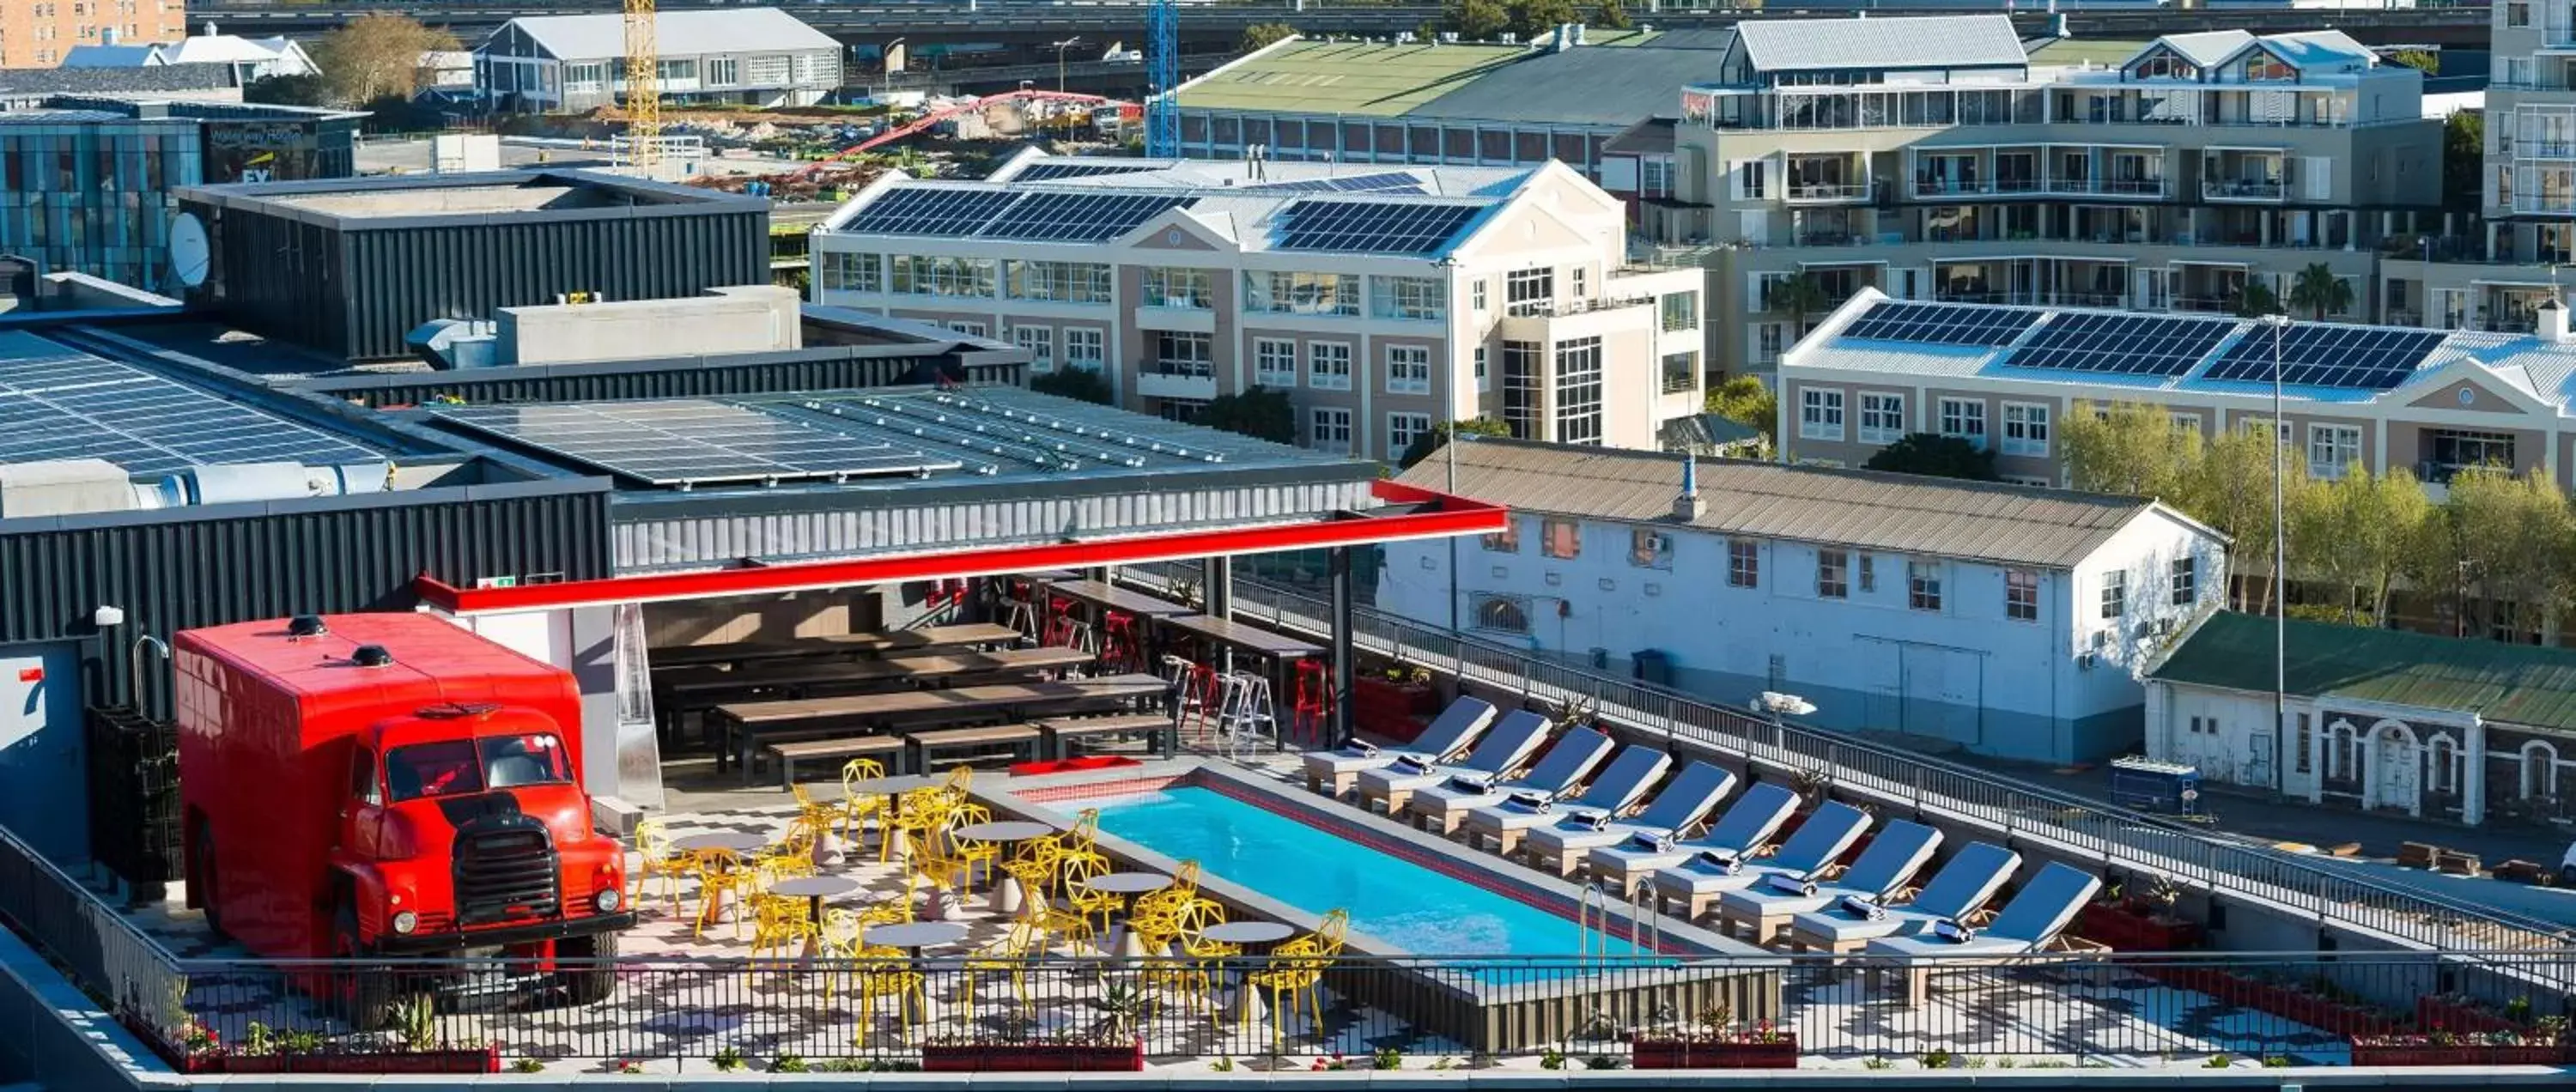 Property building, Bird's-eye View in Radisson RED Hotel V&A Waterfront Cape Town